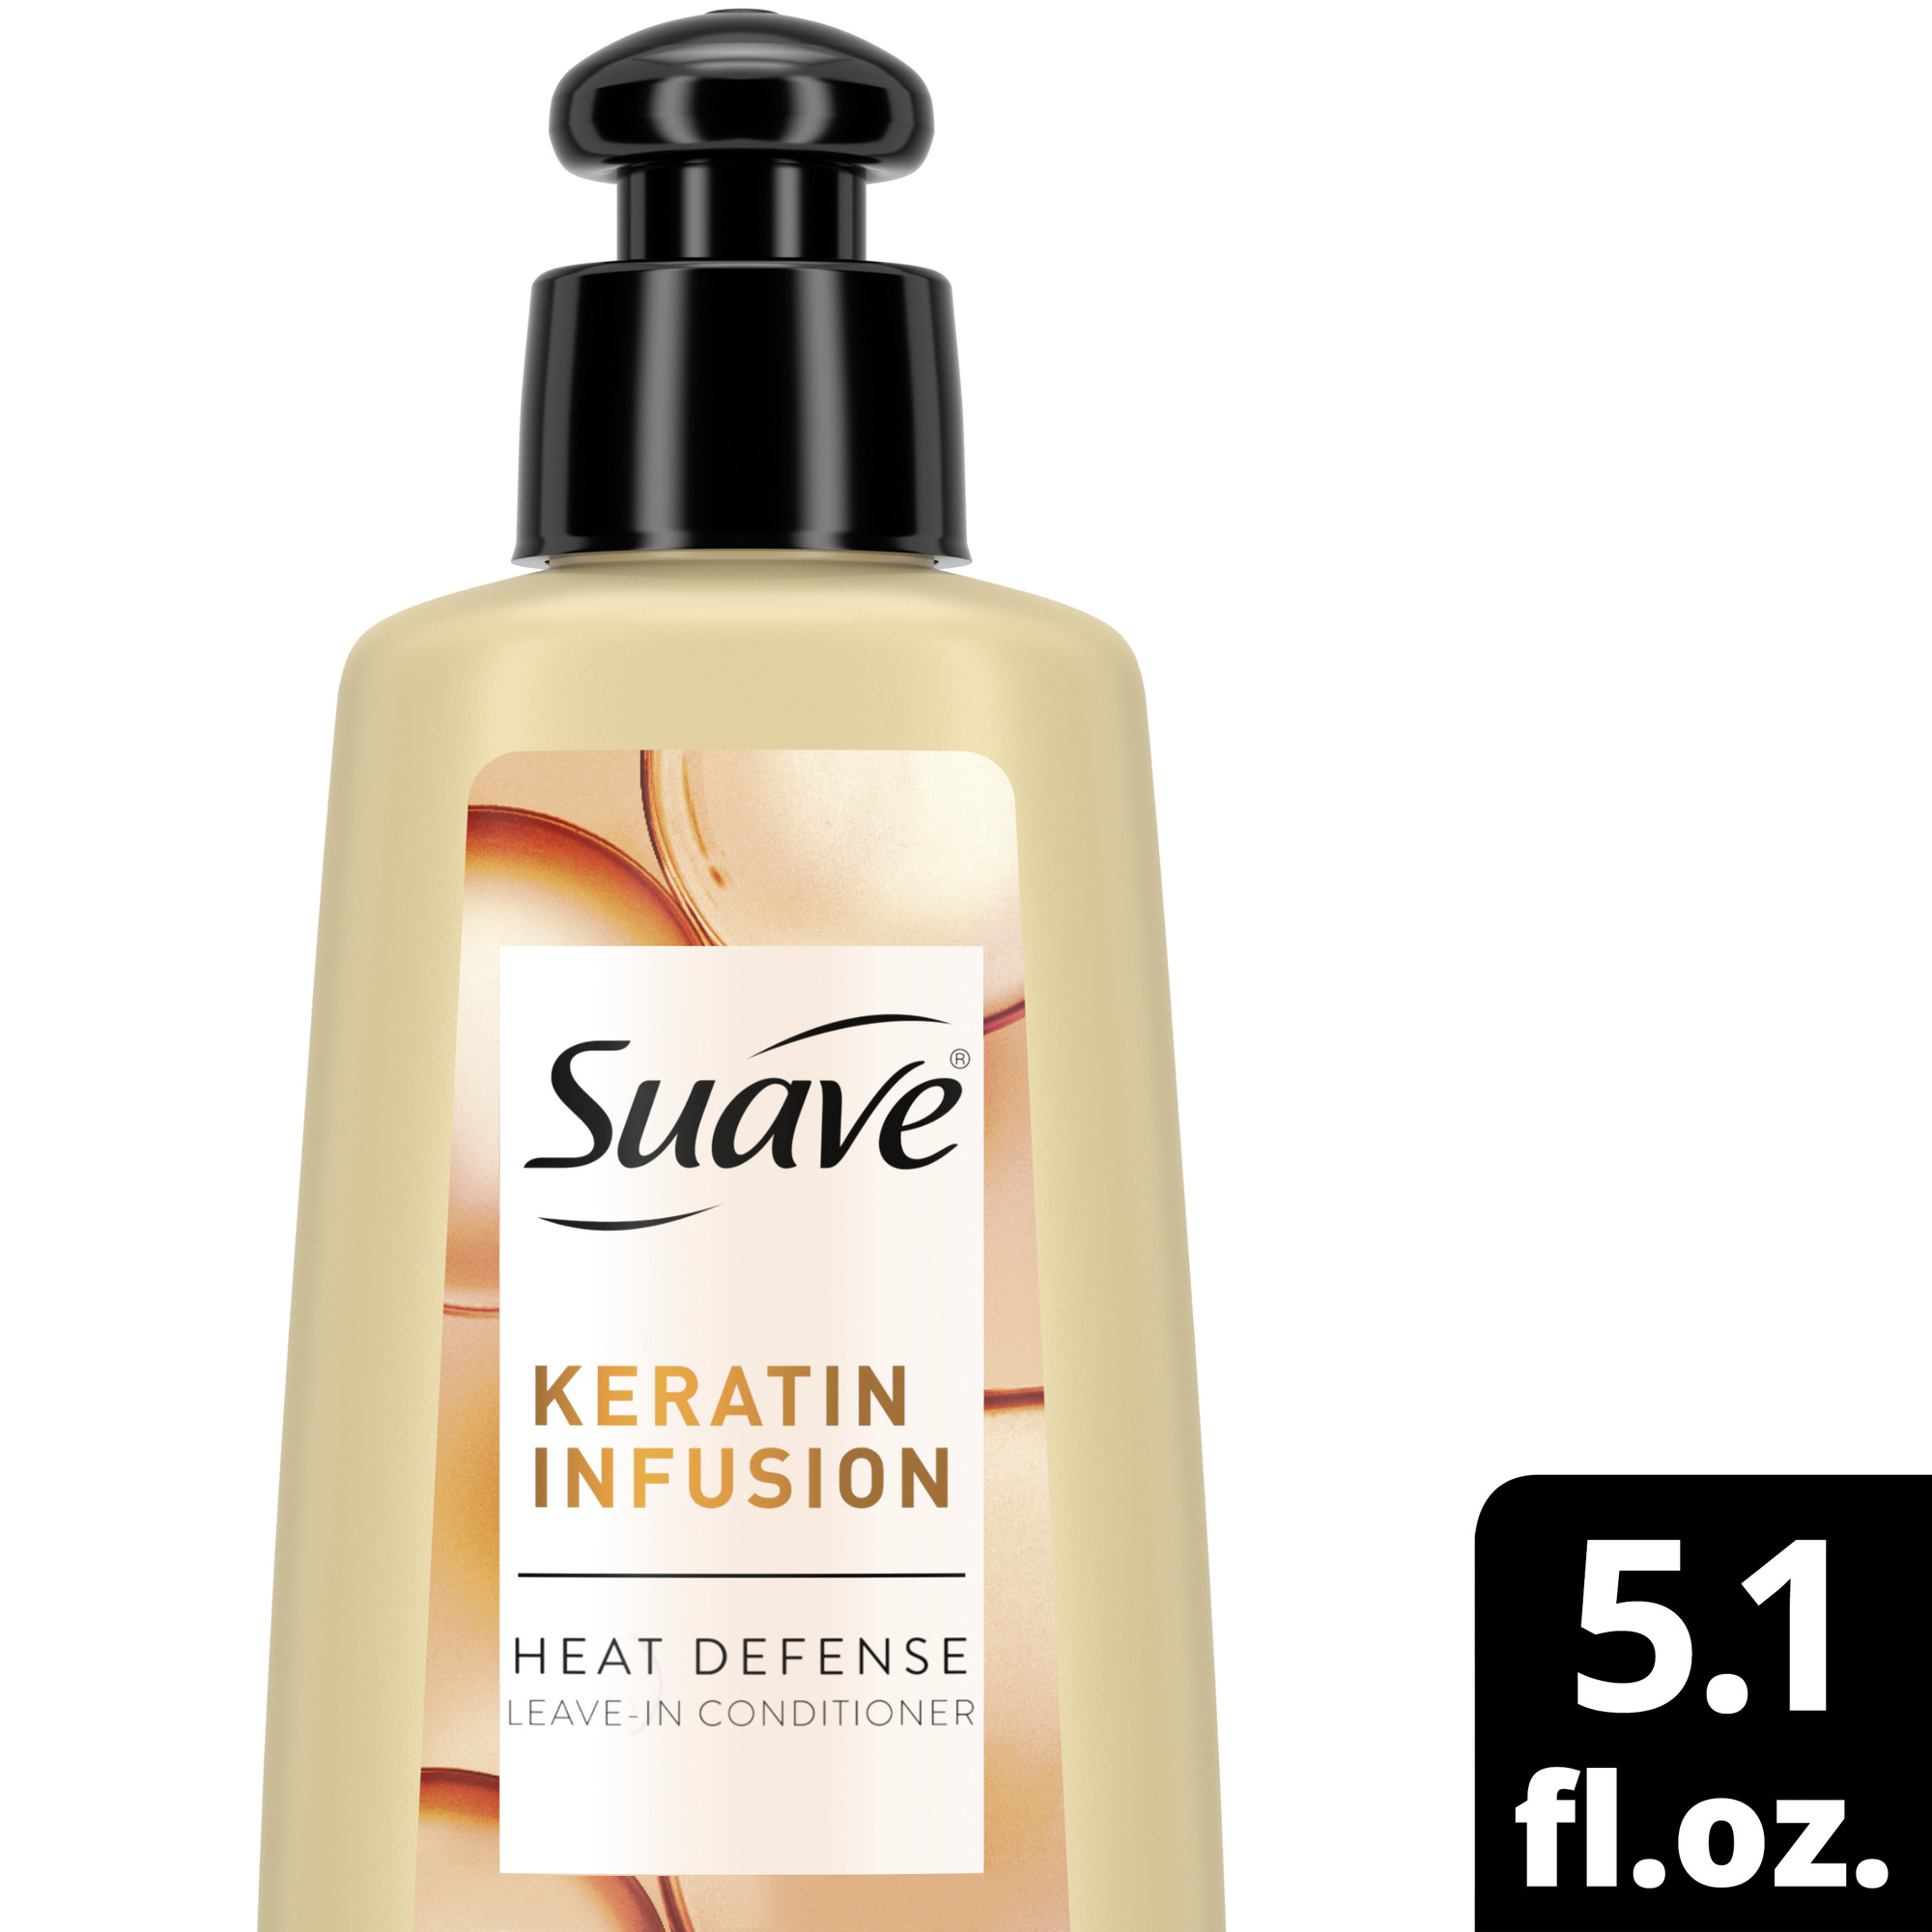 Suave Keratin Infusion Heat Defense Leave-in Conditioner 5.1 fl oz - image 1 of 5